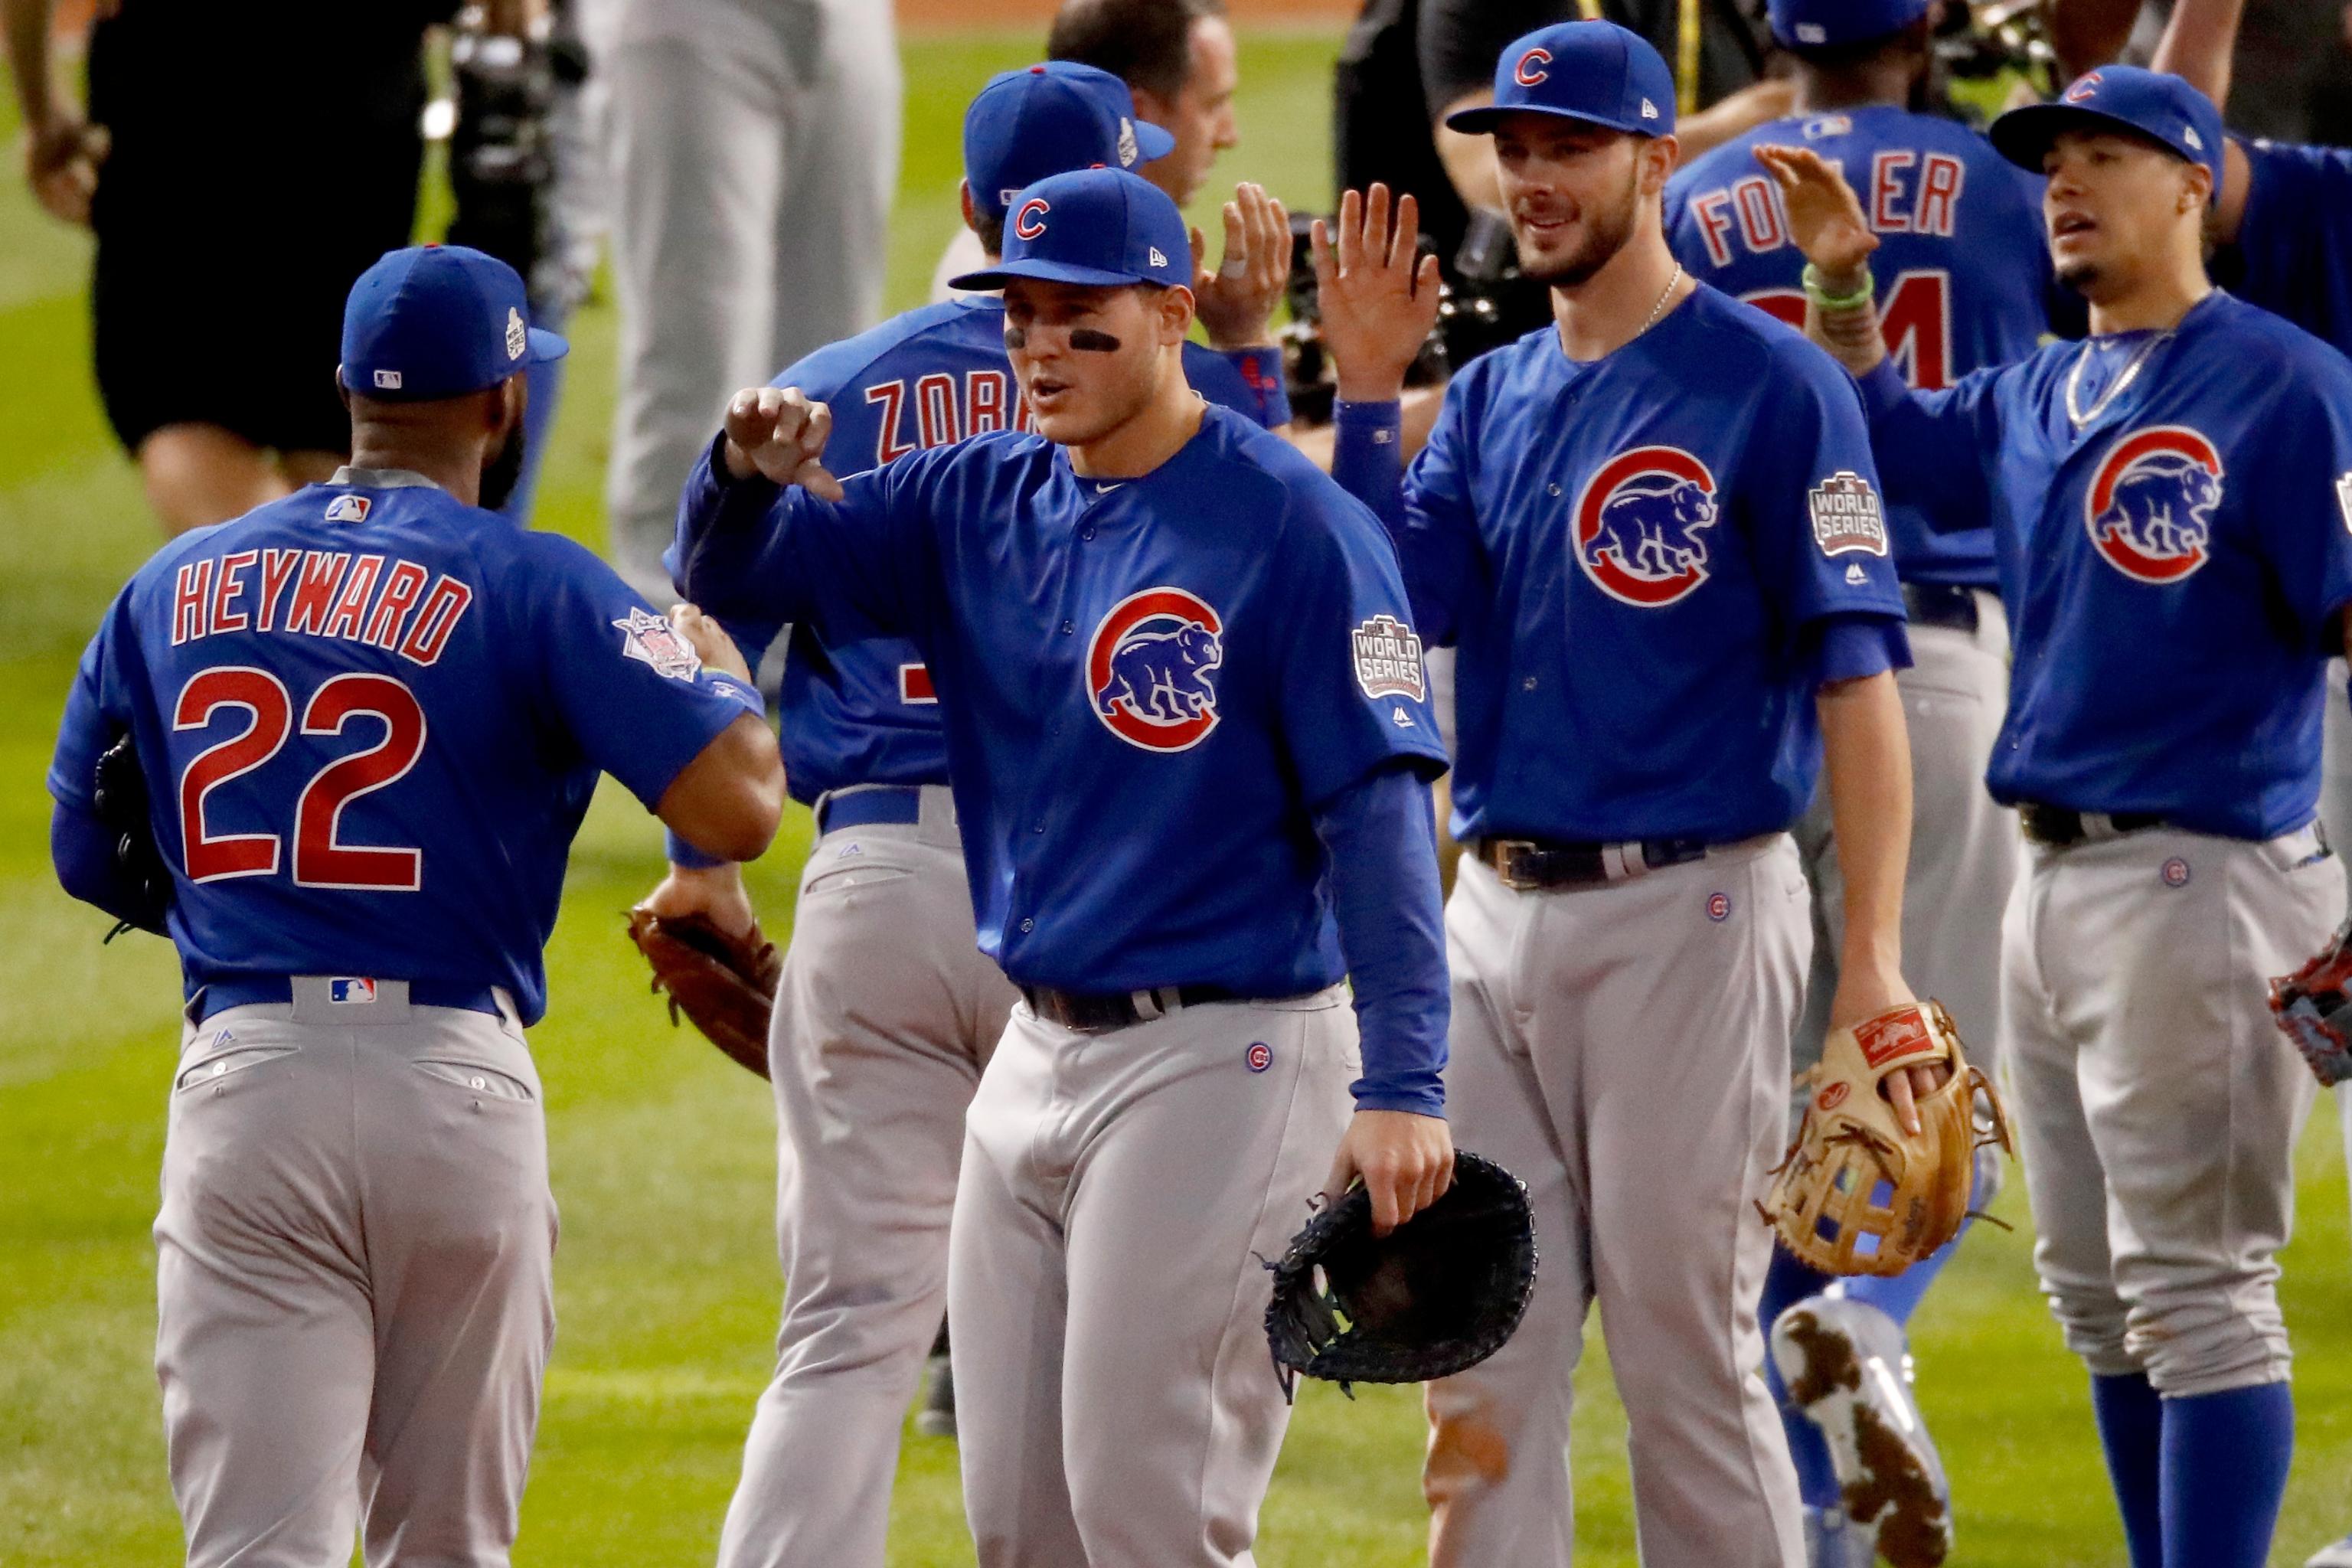 Cubs vs. Indians 2016 final score: Chicago wins Game 7 in extras